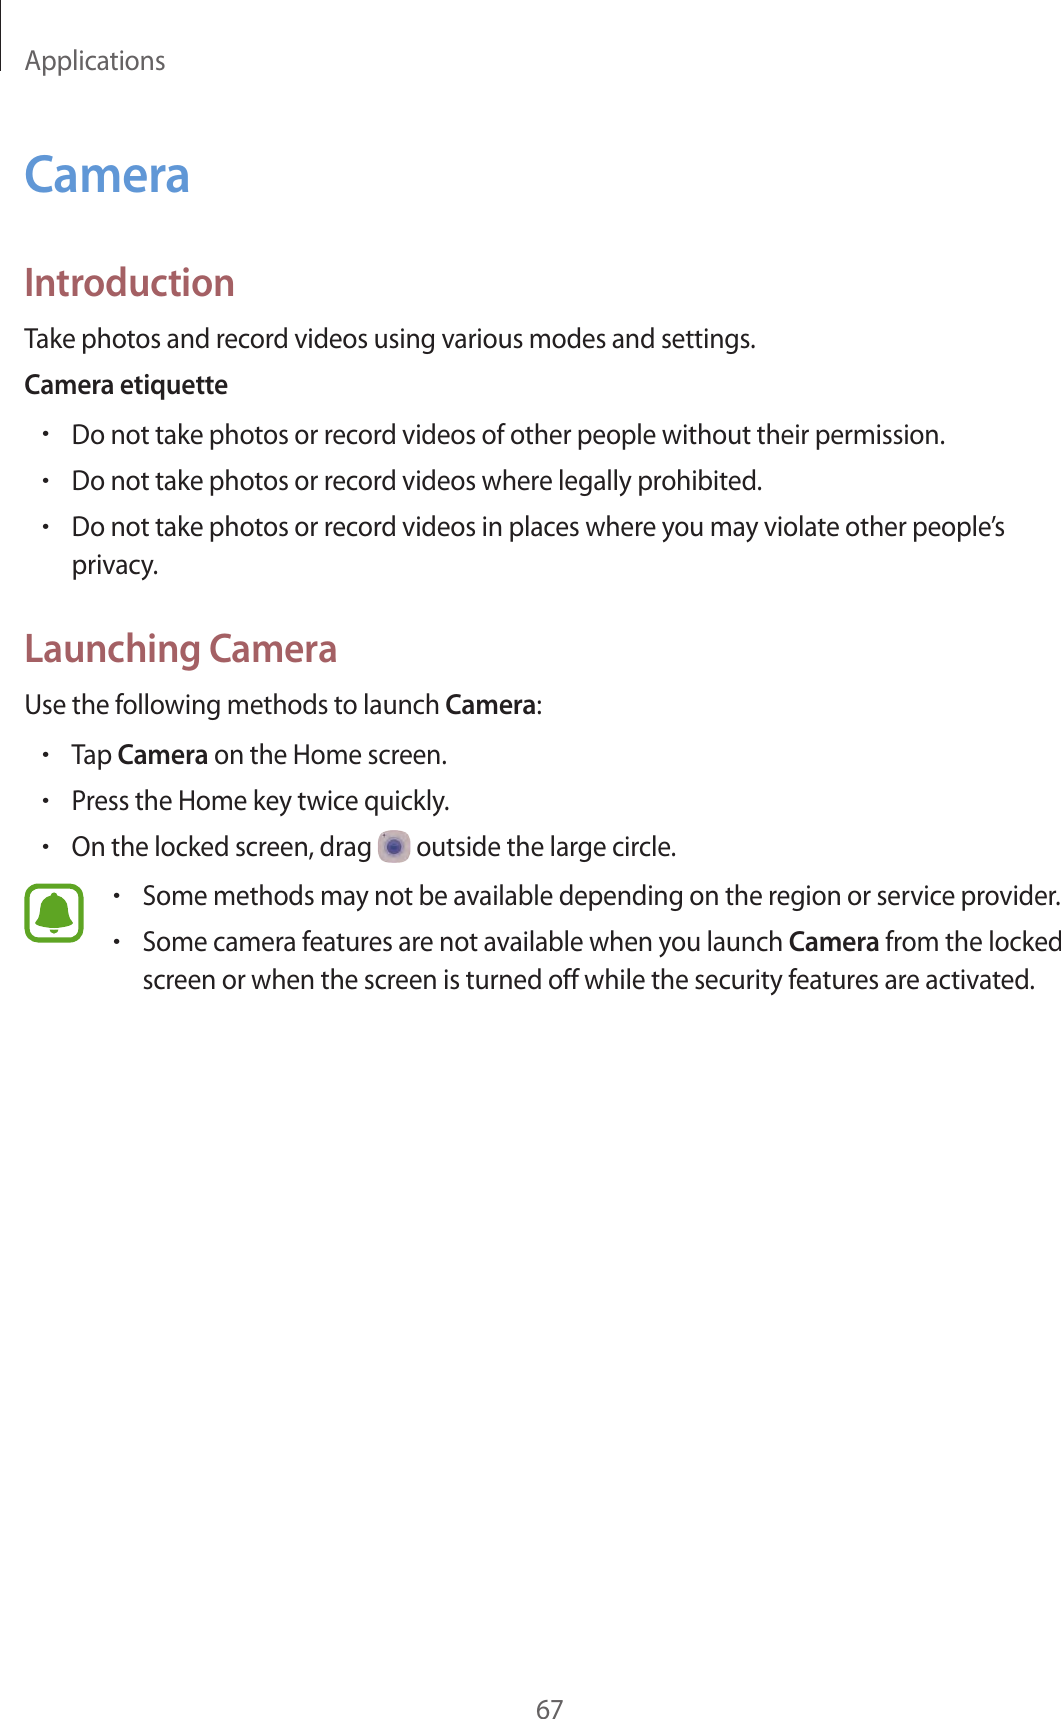 Applications67CameraIntroductionTake photos and record videos using various modes and settings.Camera etiquette•Do not take photos or record videos of other people without their permission.•Do not take photos or record videos where legally prohibited.•Do not take photos or record videos in places where you may violate other people’s privacy.Launching CameraUse the following methods to launch Camera:•Tap Camera on the Home screen.•Press the Home key twice quickly.•On the locked screen, drag   outside the large circle.•Some methods may not be available depending on the region or service provider.•Some camera features are not available when you launch Camera from the locked screen or when the screen is turned off while the security features are activated.